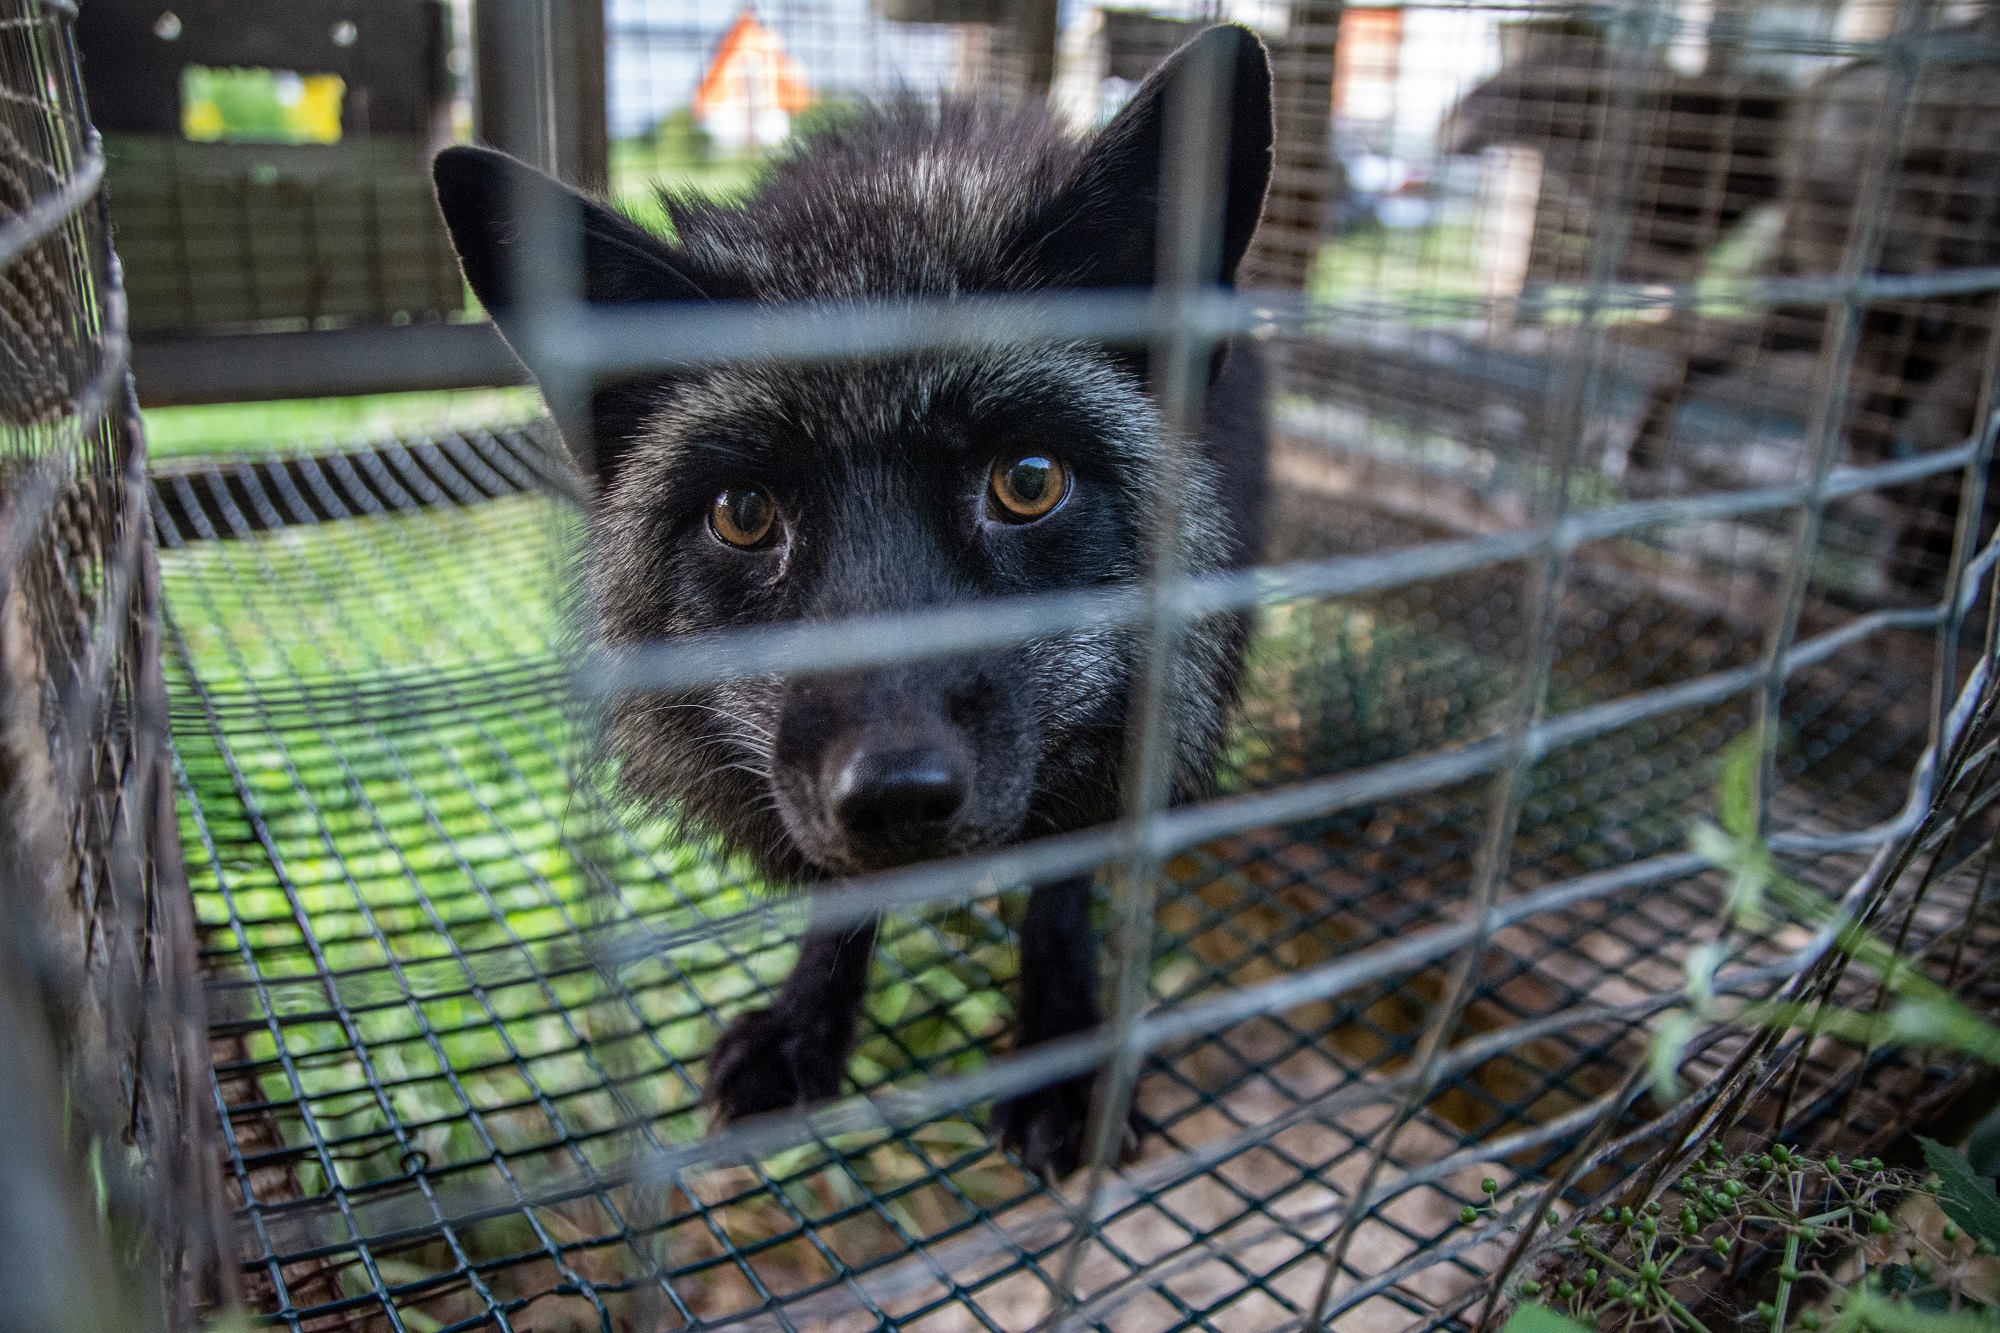 A silver fox stares through the wire from inside a barren cage at a fur farm in Quebec, Canada. Farmed foxes will spend their entire life confined, and typically alone, inside this type of cage. Foxes like this individual are used for breeding or will eventually be killed for their fur.